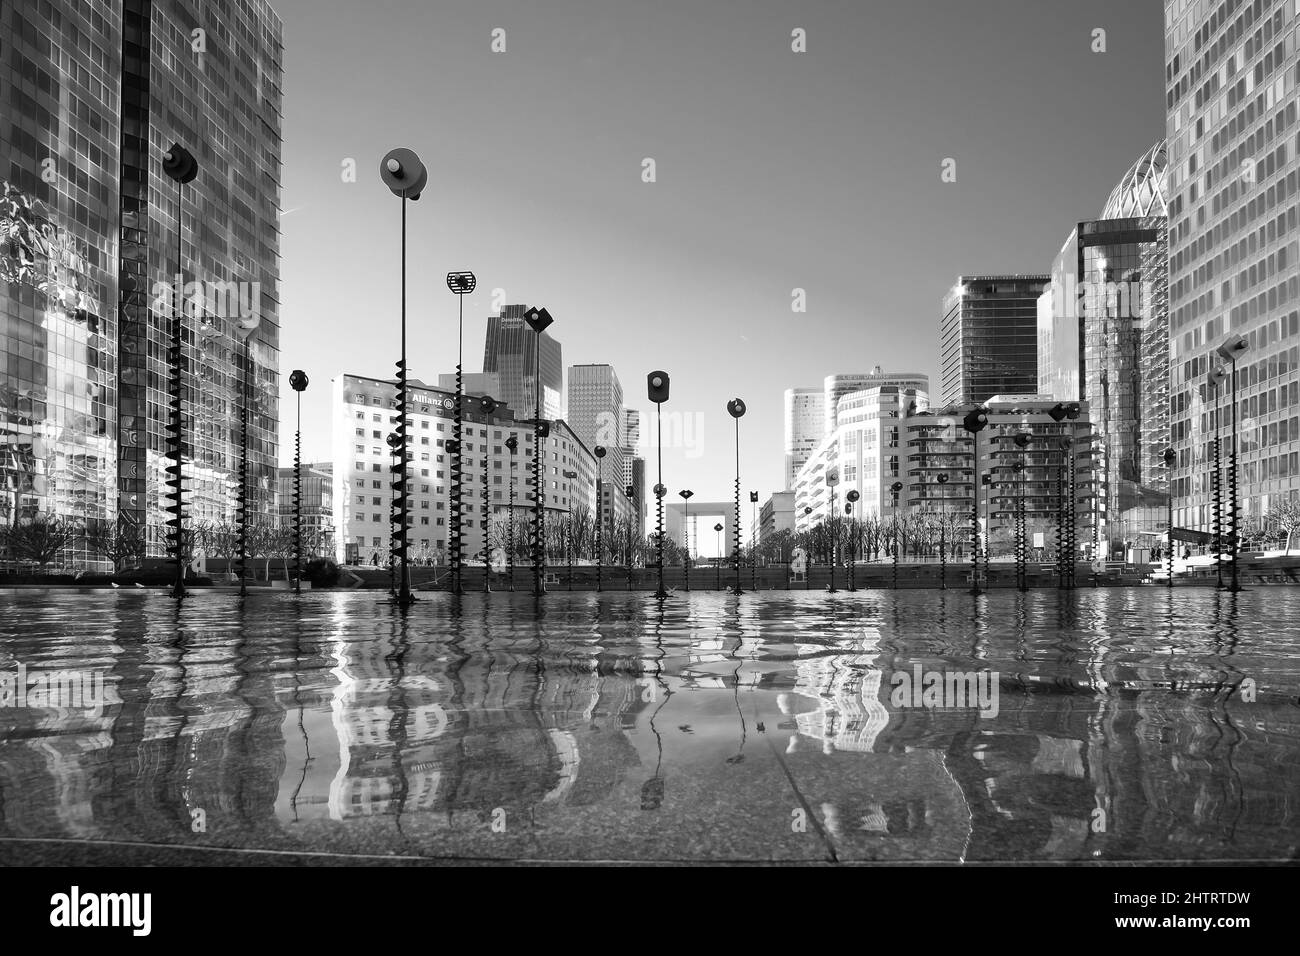 Paris, France - February 27, 2022 : A pool of water decorated with art at the famous business district La Défense in Paris in black and white Stock Photo